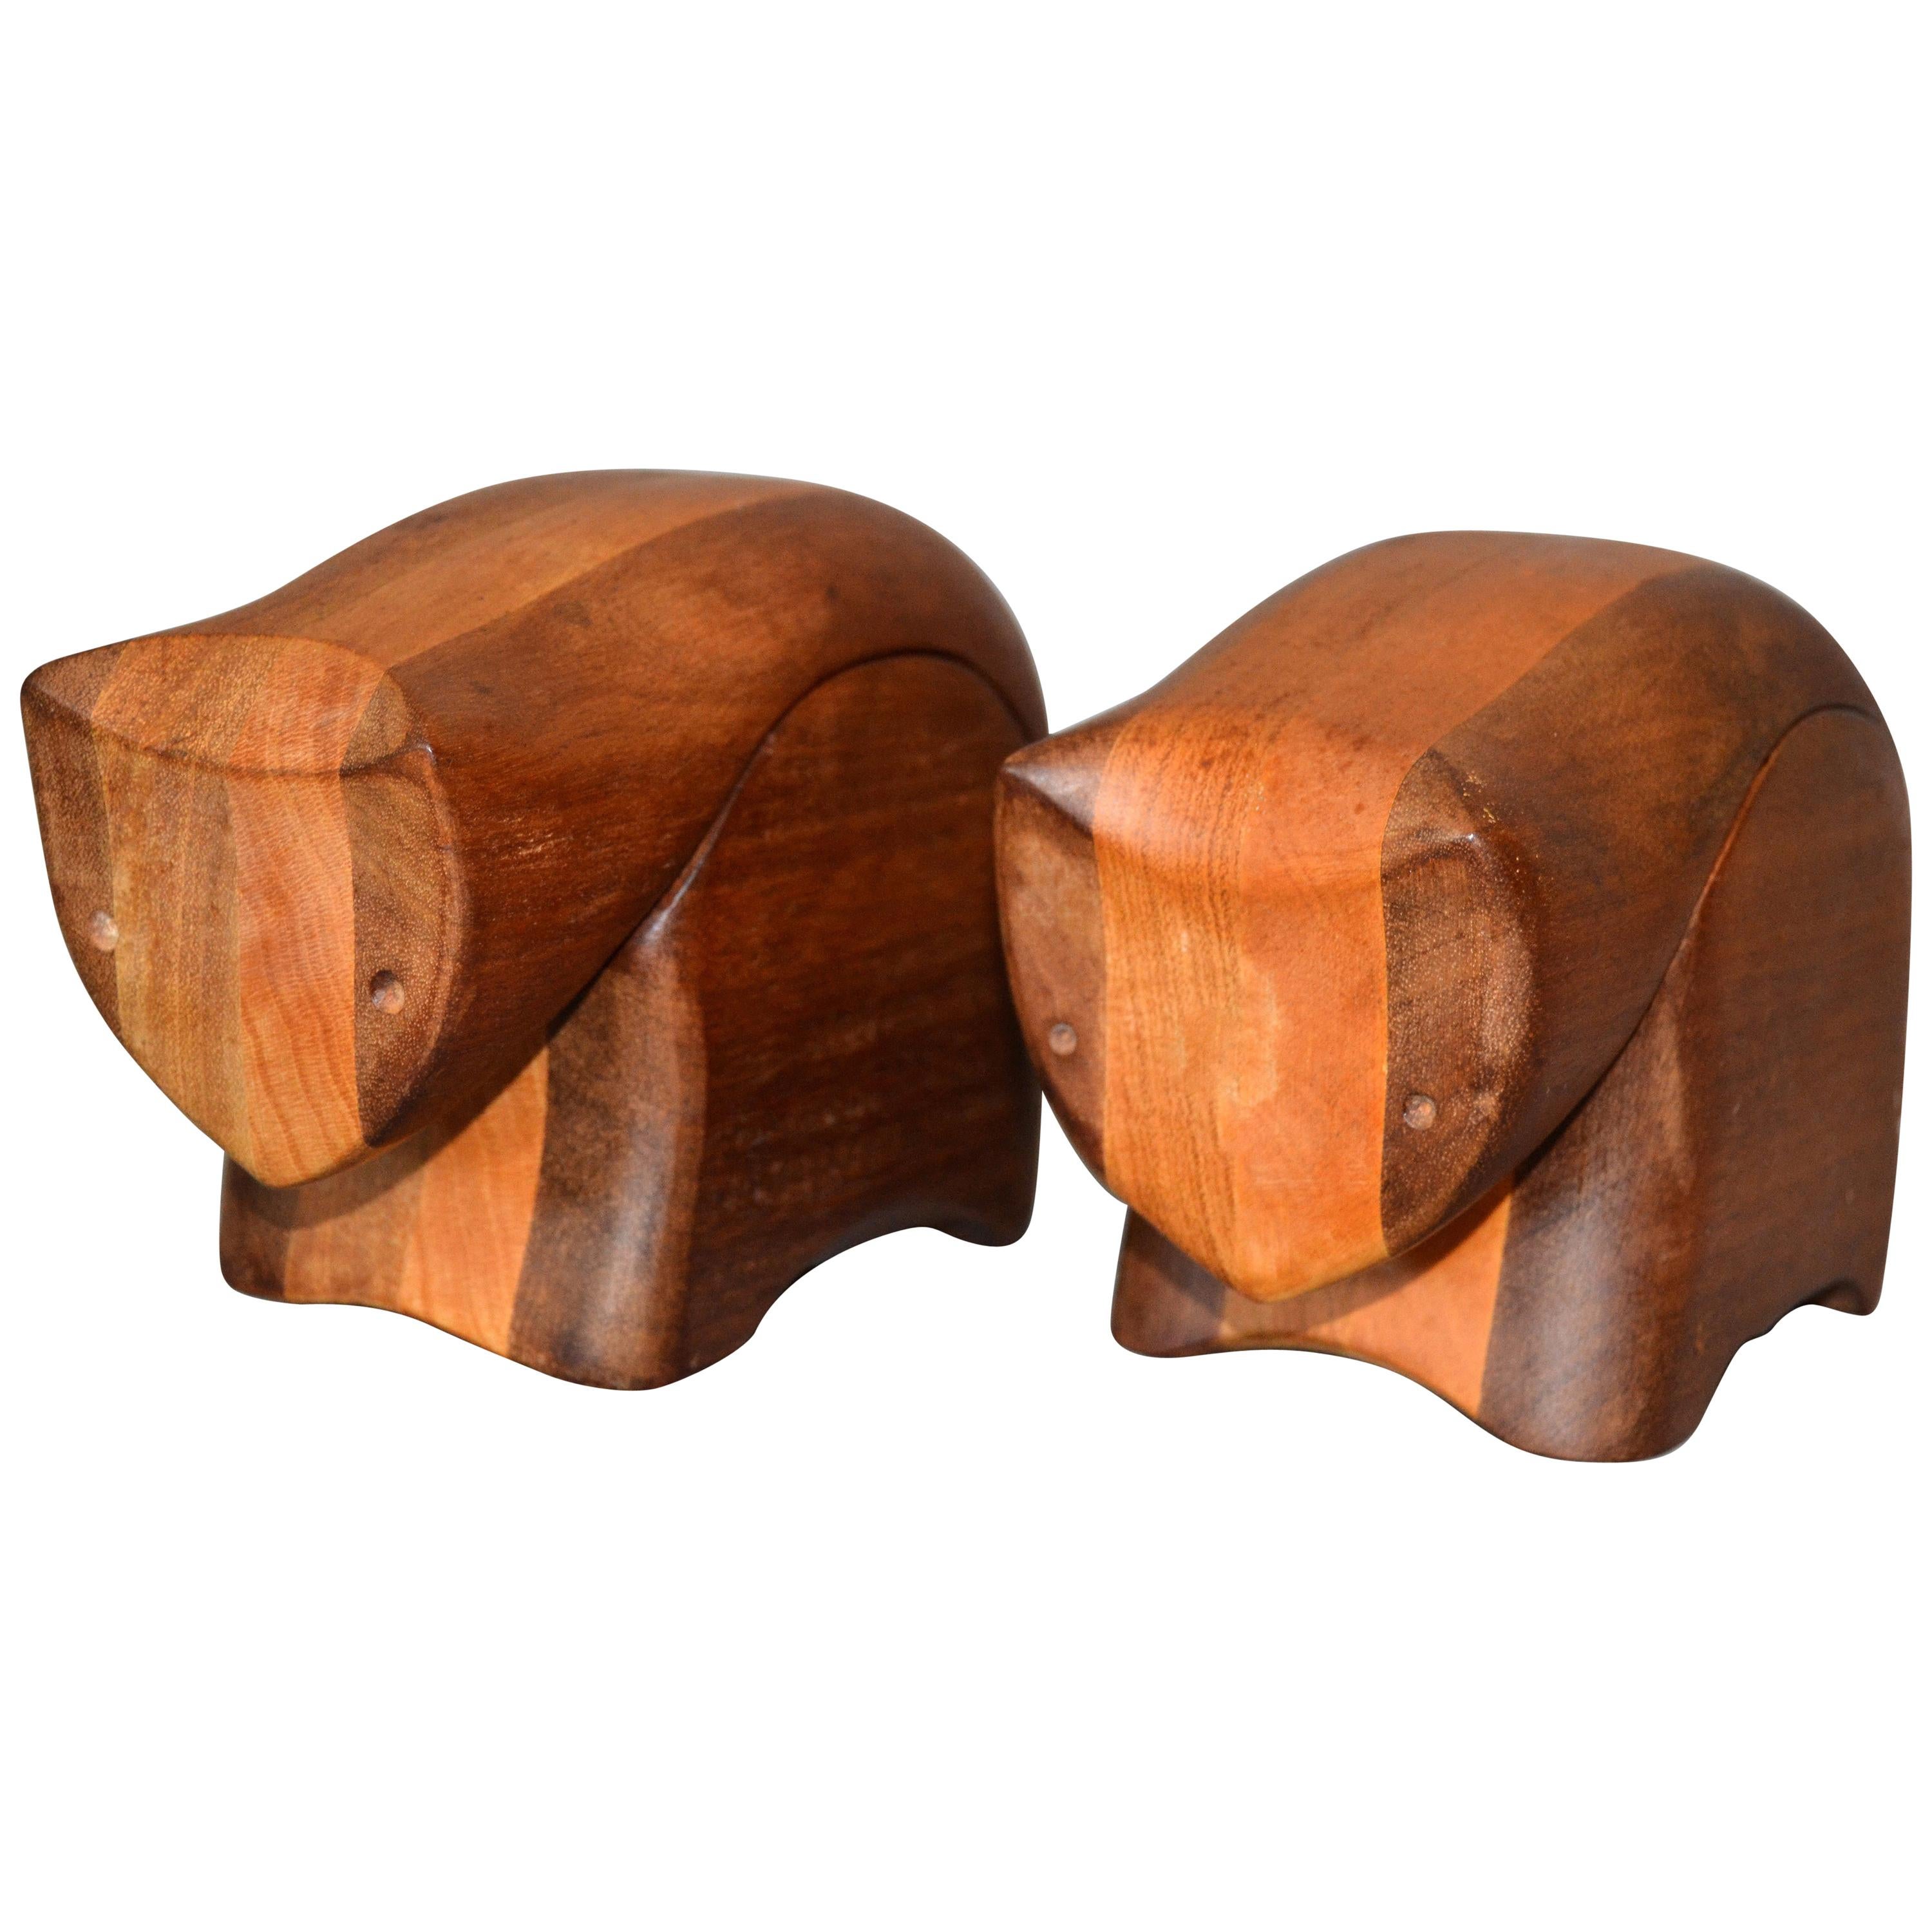 Handcrafted 'Creative Critters' Animal Figurine Jewelry Box Tropical Wood, Pair